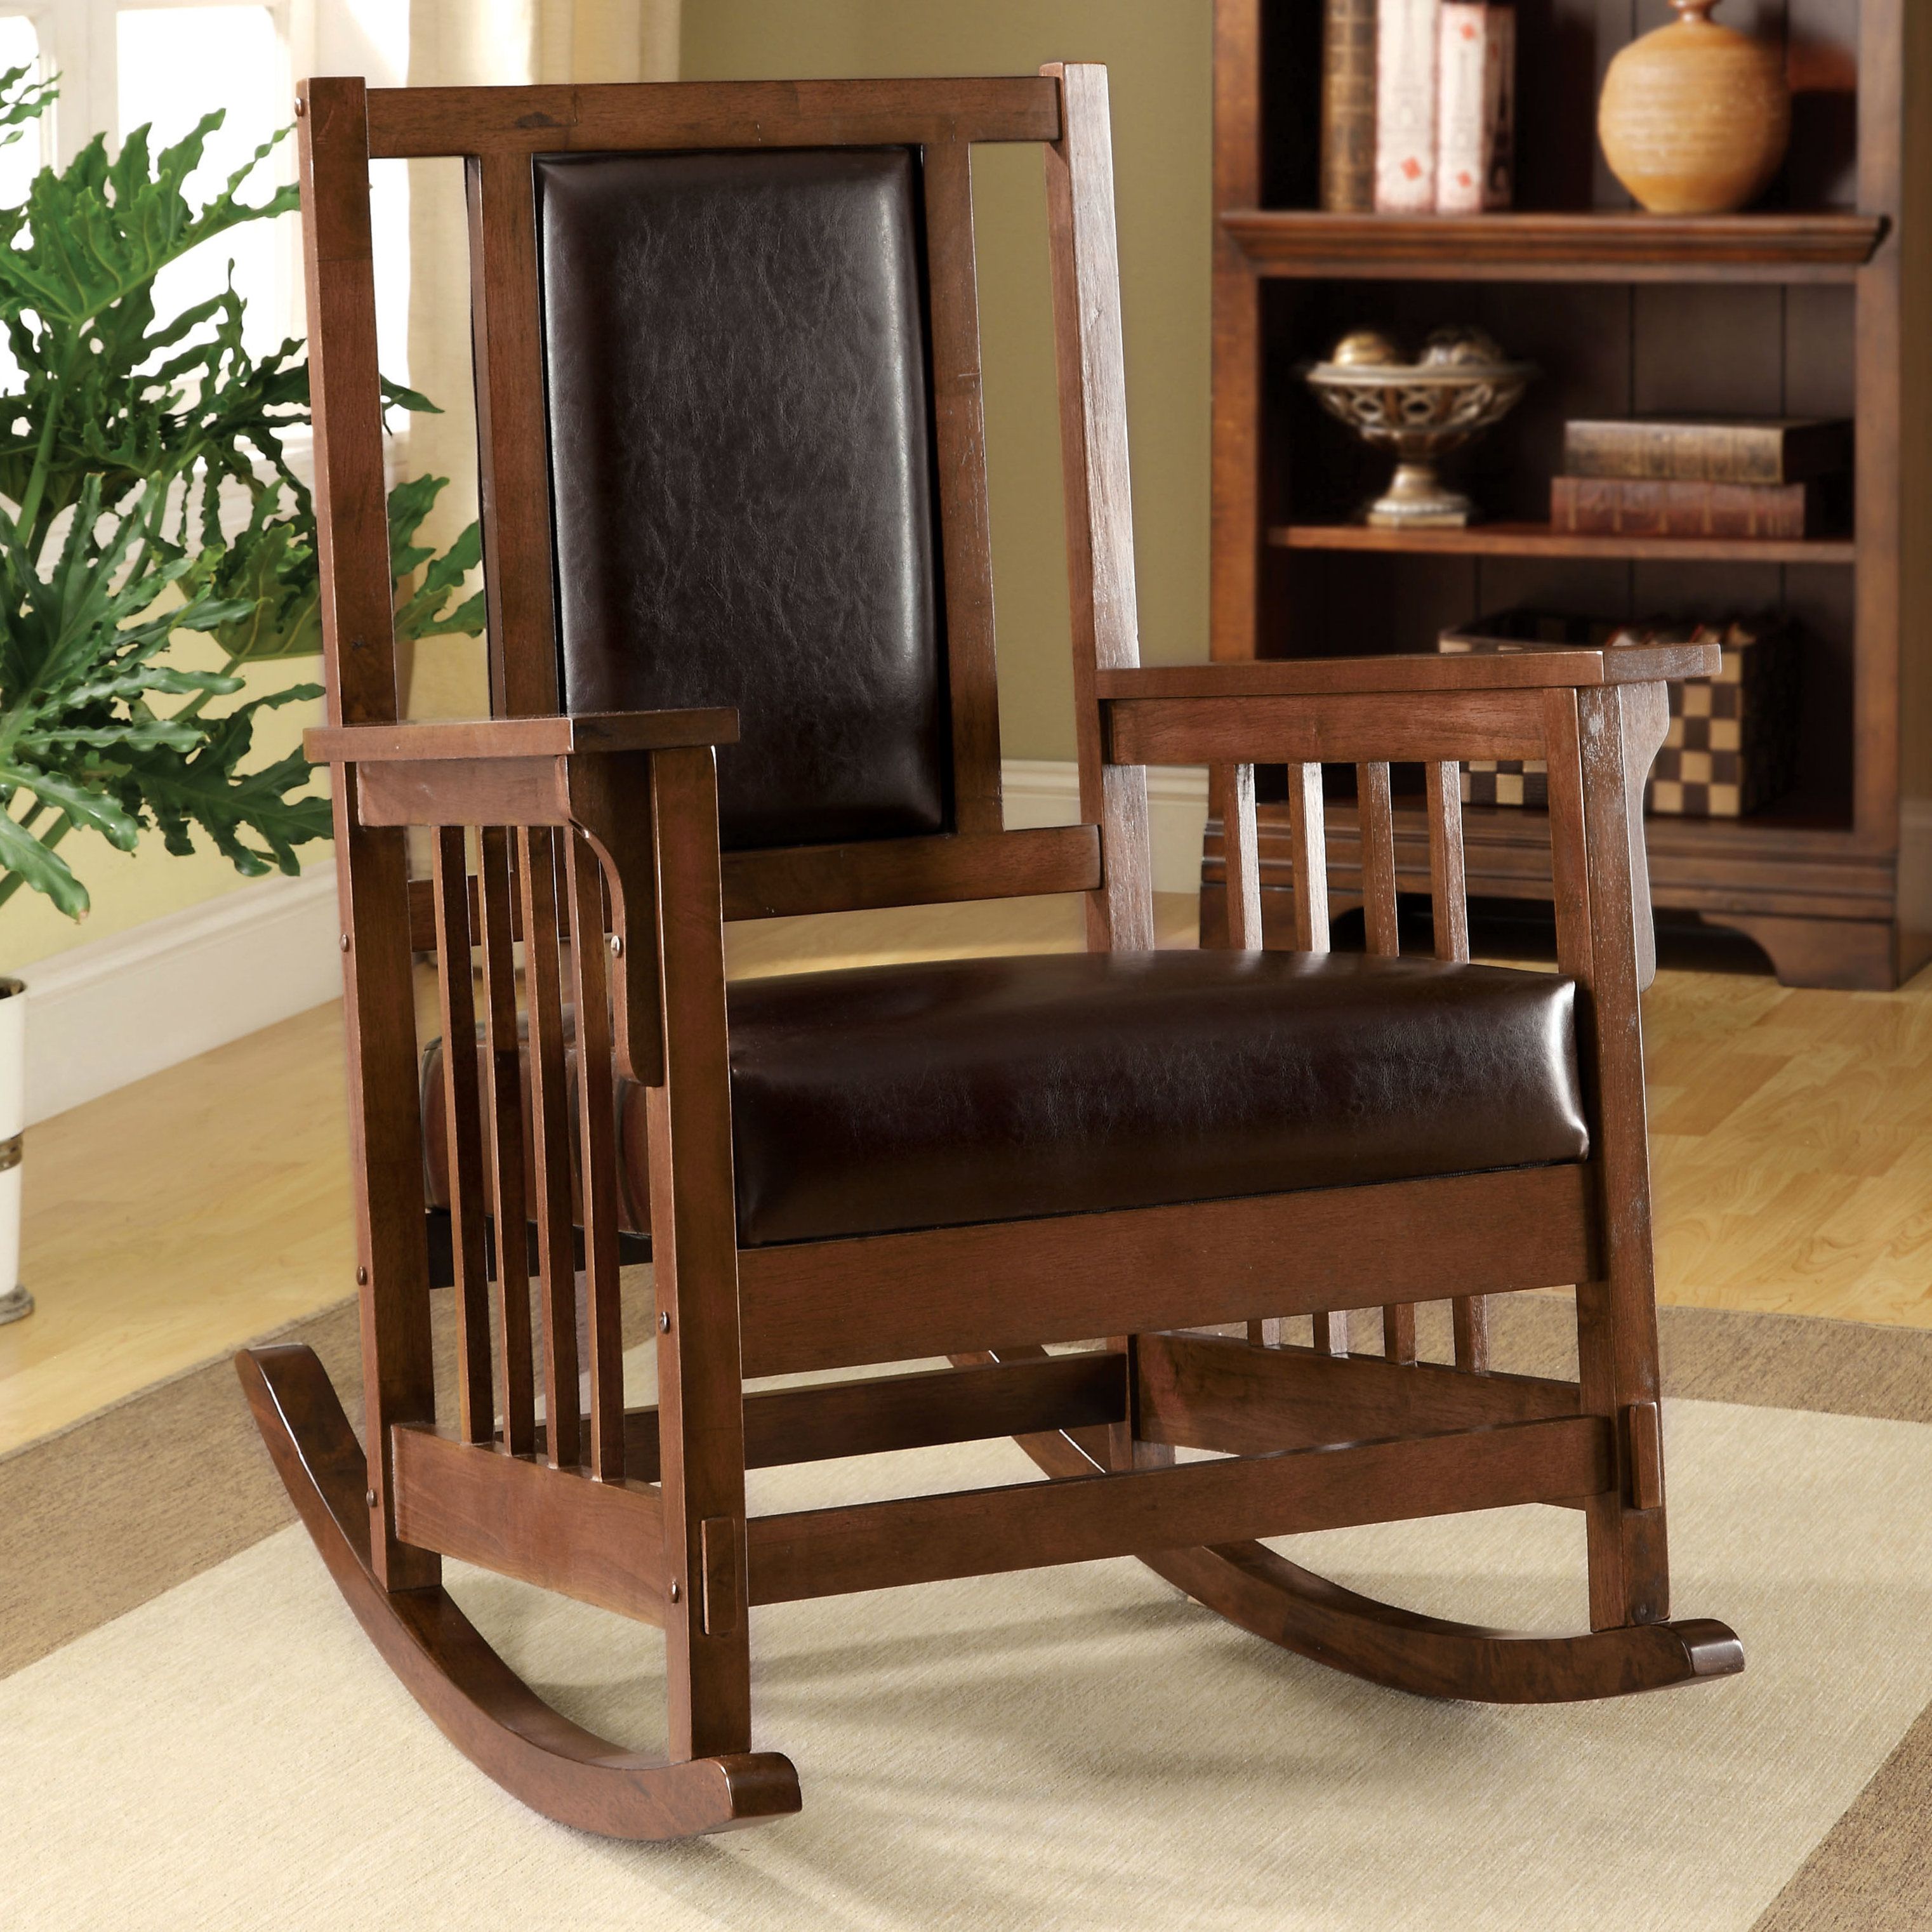 Faux Leather Rocking Chairs You'll Love In 2019 | Wayfair Regarding Mission Design Wood Rocking Chairs With Brown Leather Seat (Photo 11 of 20)